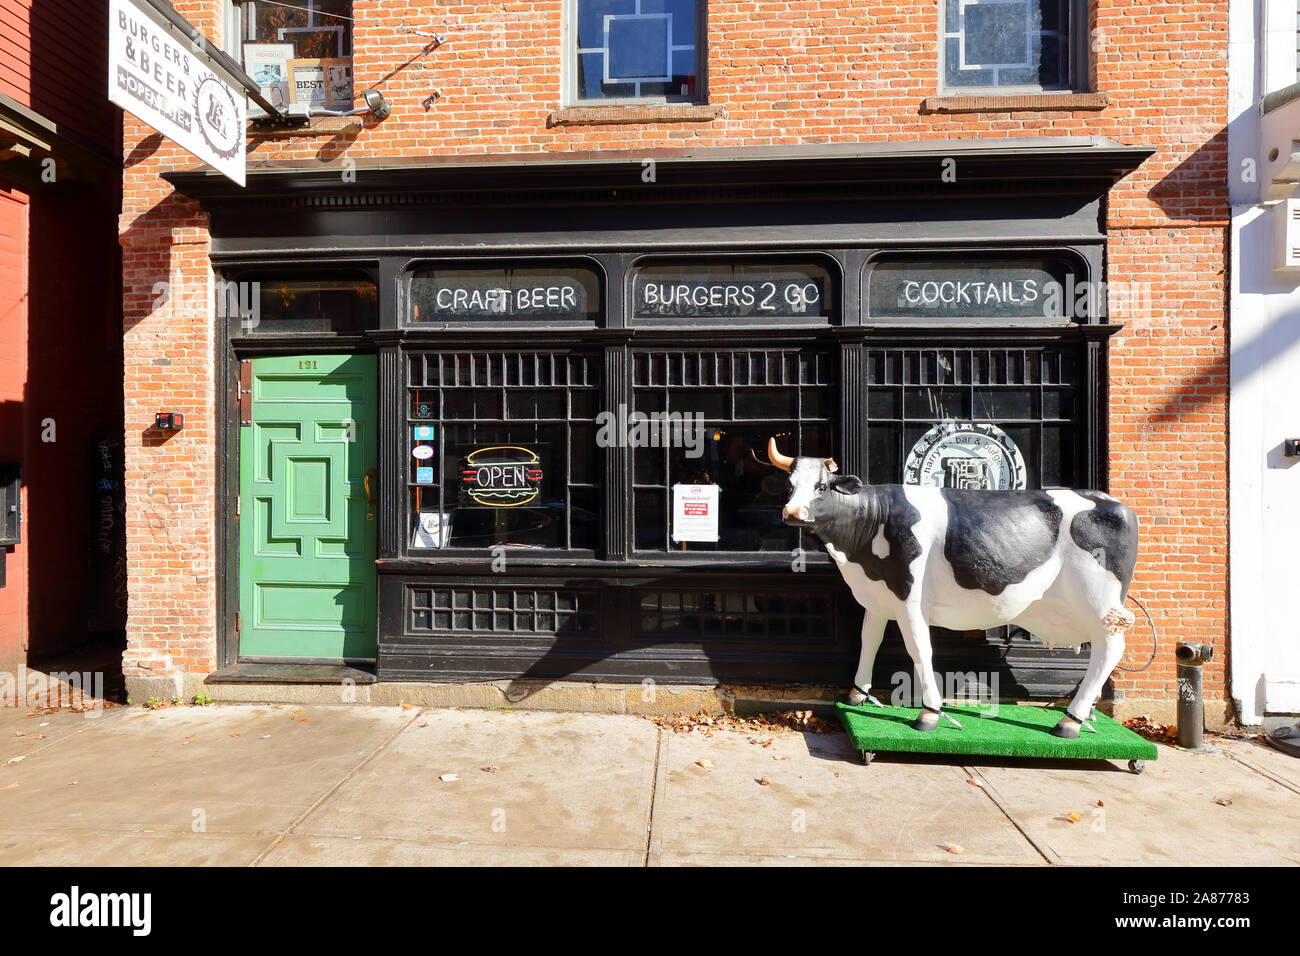 Harry's Bar & Burger, 121 North Main Street, Providence, Rhode Island. exterior storefront of eatery and bar in the College Hill neighborhood Stock Photo